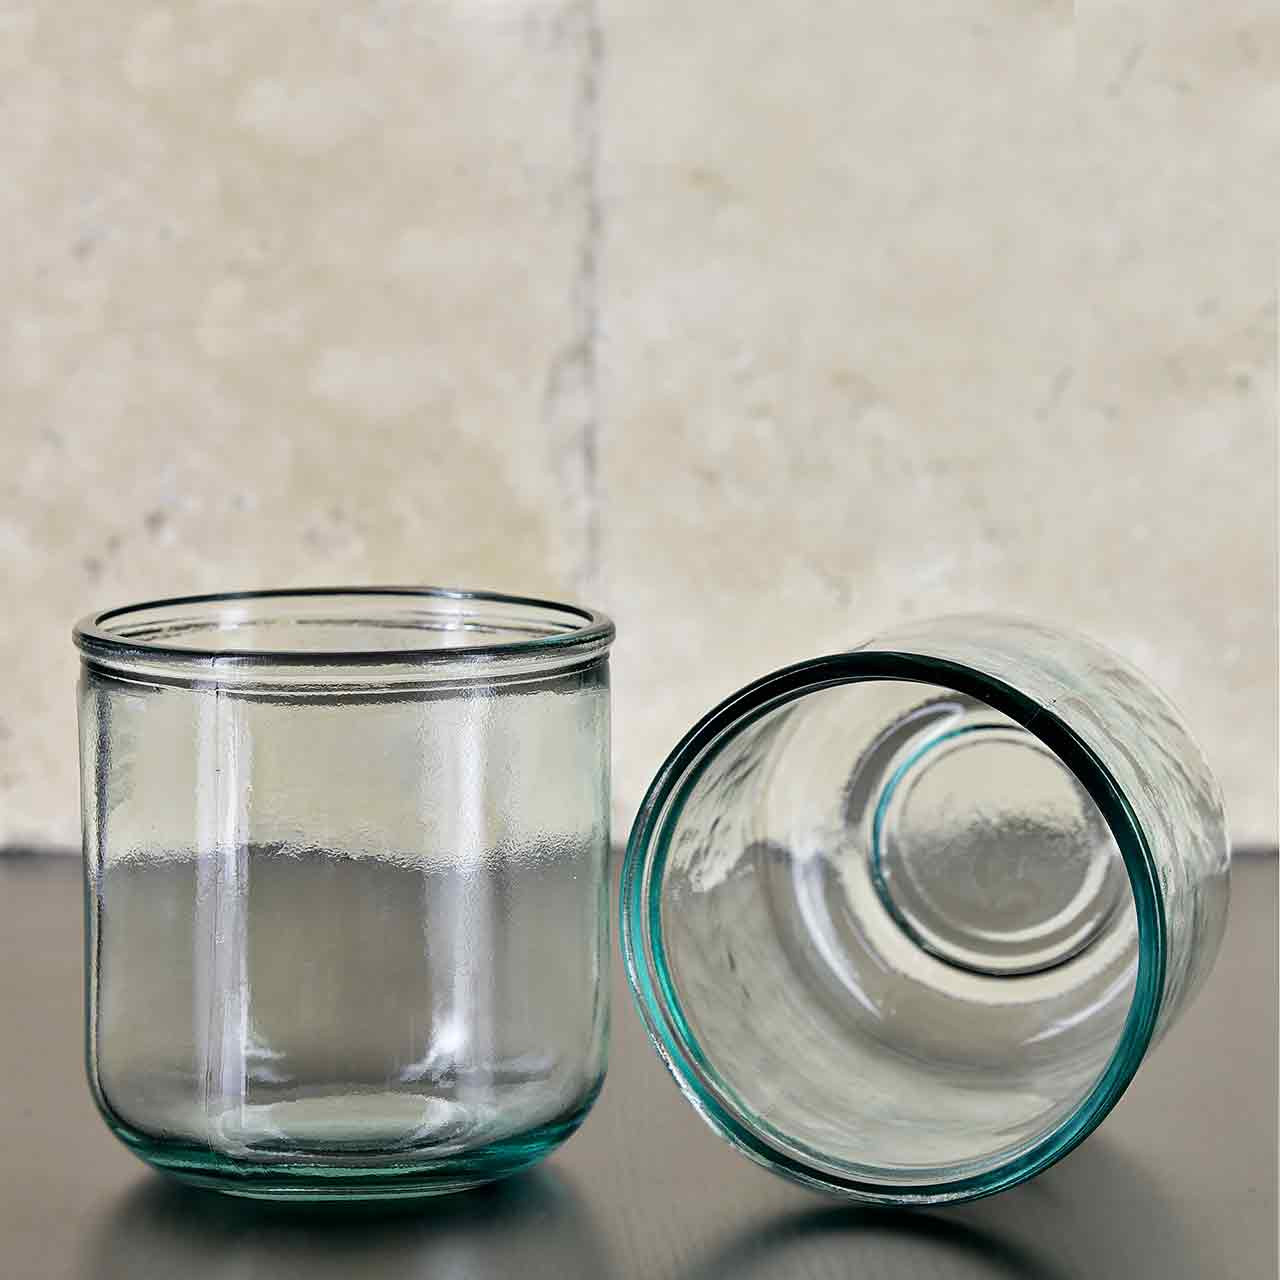 https://cdn11.bigcommerce.com/s-uzavep2g8k/images/stencil/1280x1280/products/871/3886/G2226-Classico-Recycled-Glass-Candle-Container-X2__37983.1704306402.jpg?c=1